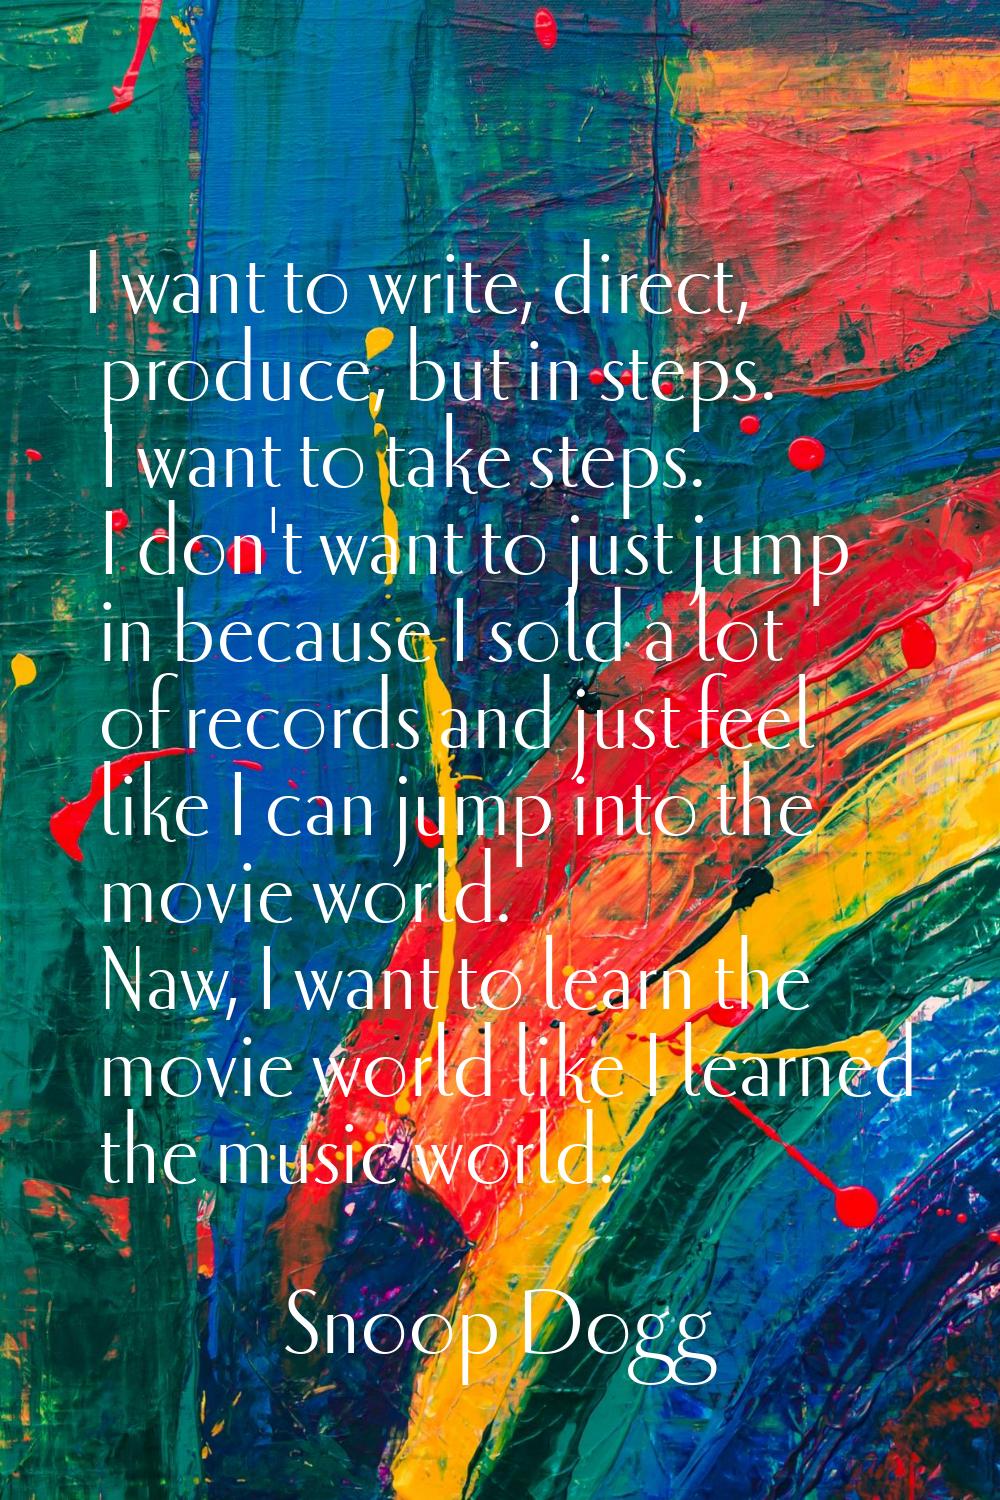 I want to write, direct, produce, but in steps. I want to take steps. I don't want to just jump in 